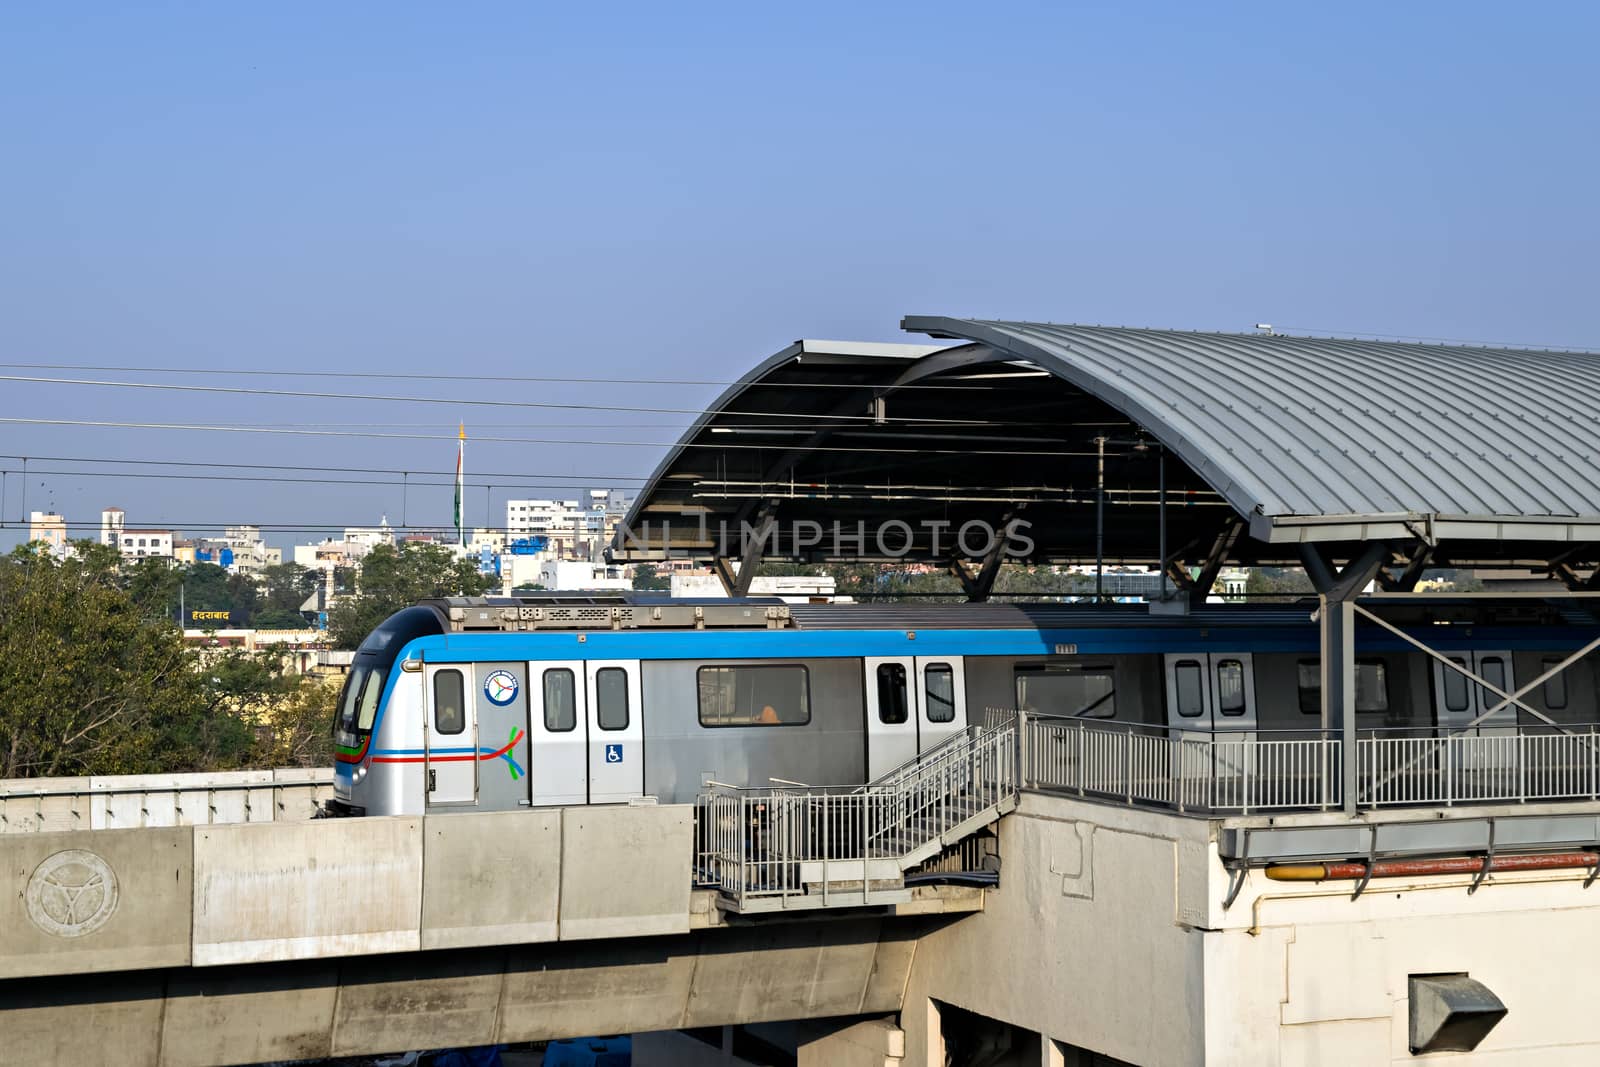 Rapid transit Hyderabad metro train exits Nampally station in the morning. The service has successfully completed one year in 2019, Namapally, Hederabad, India.